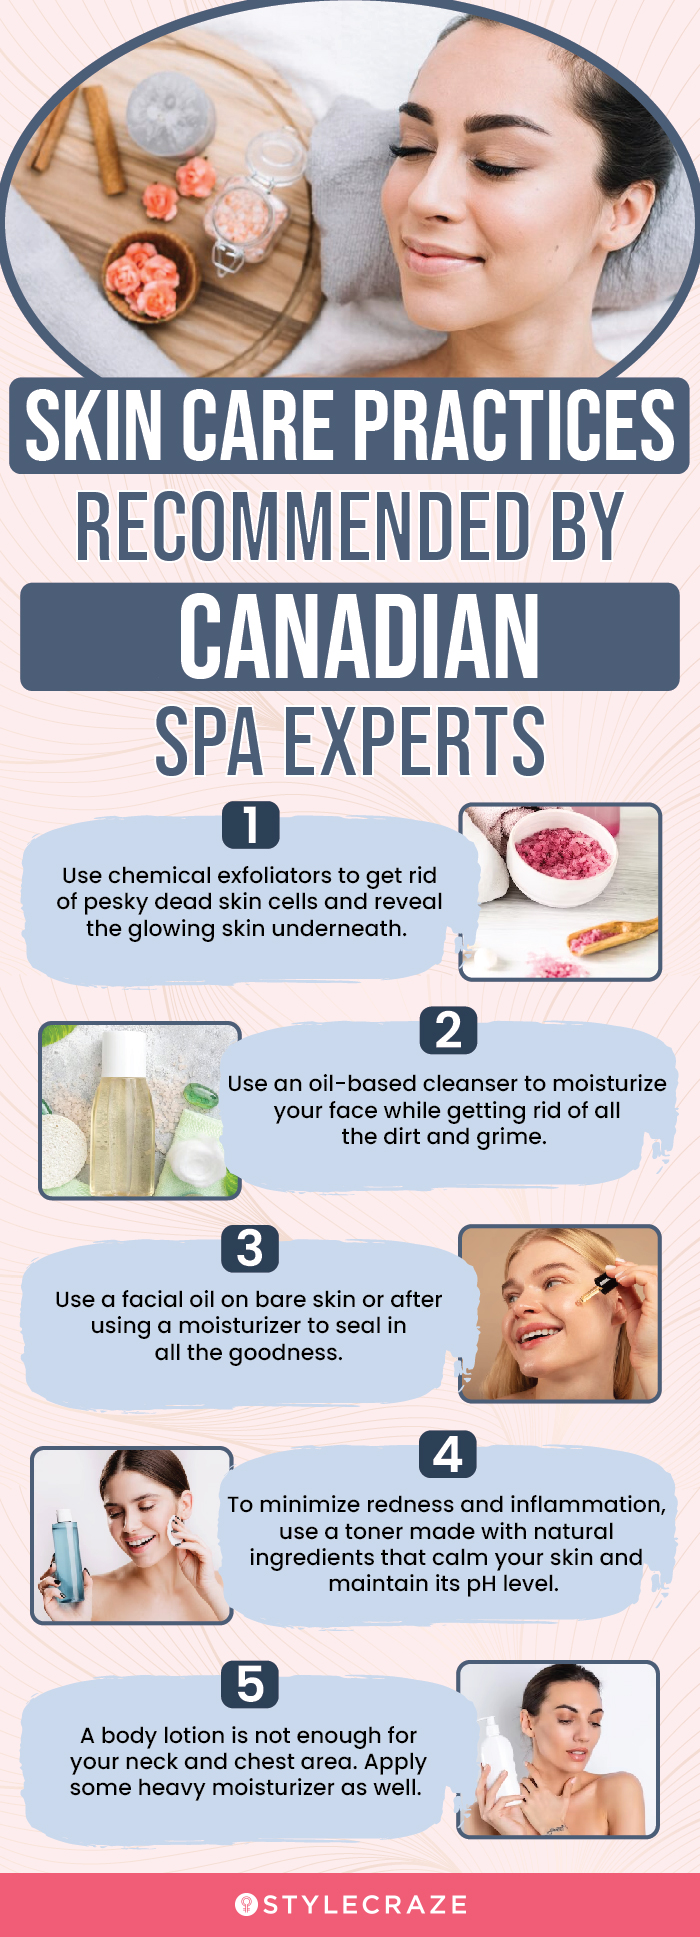 Skincare Practices Recommended By Canadian Spa Experts (infographic)